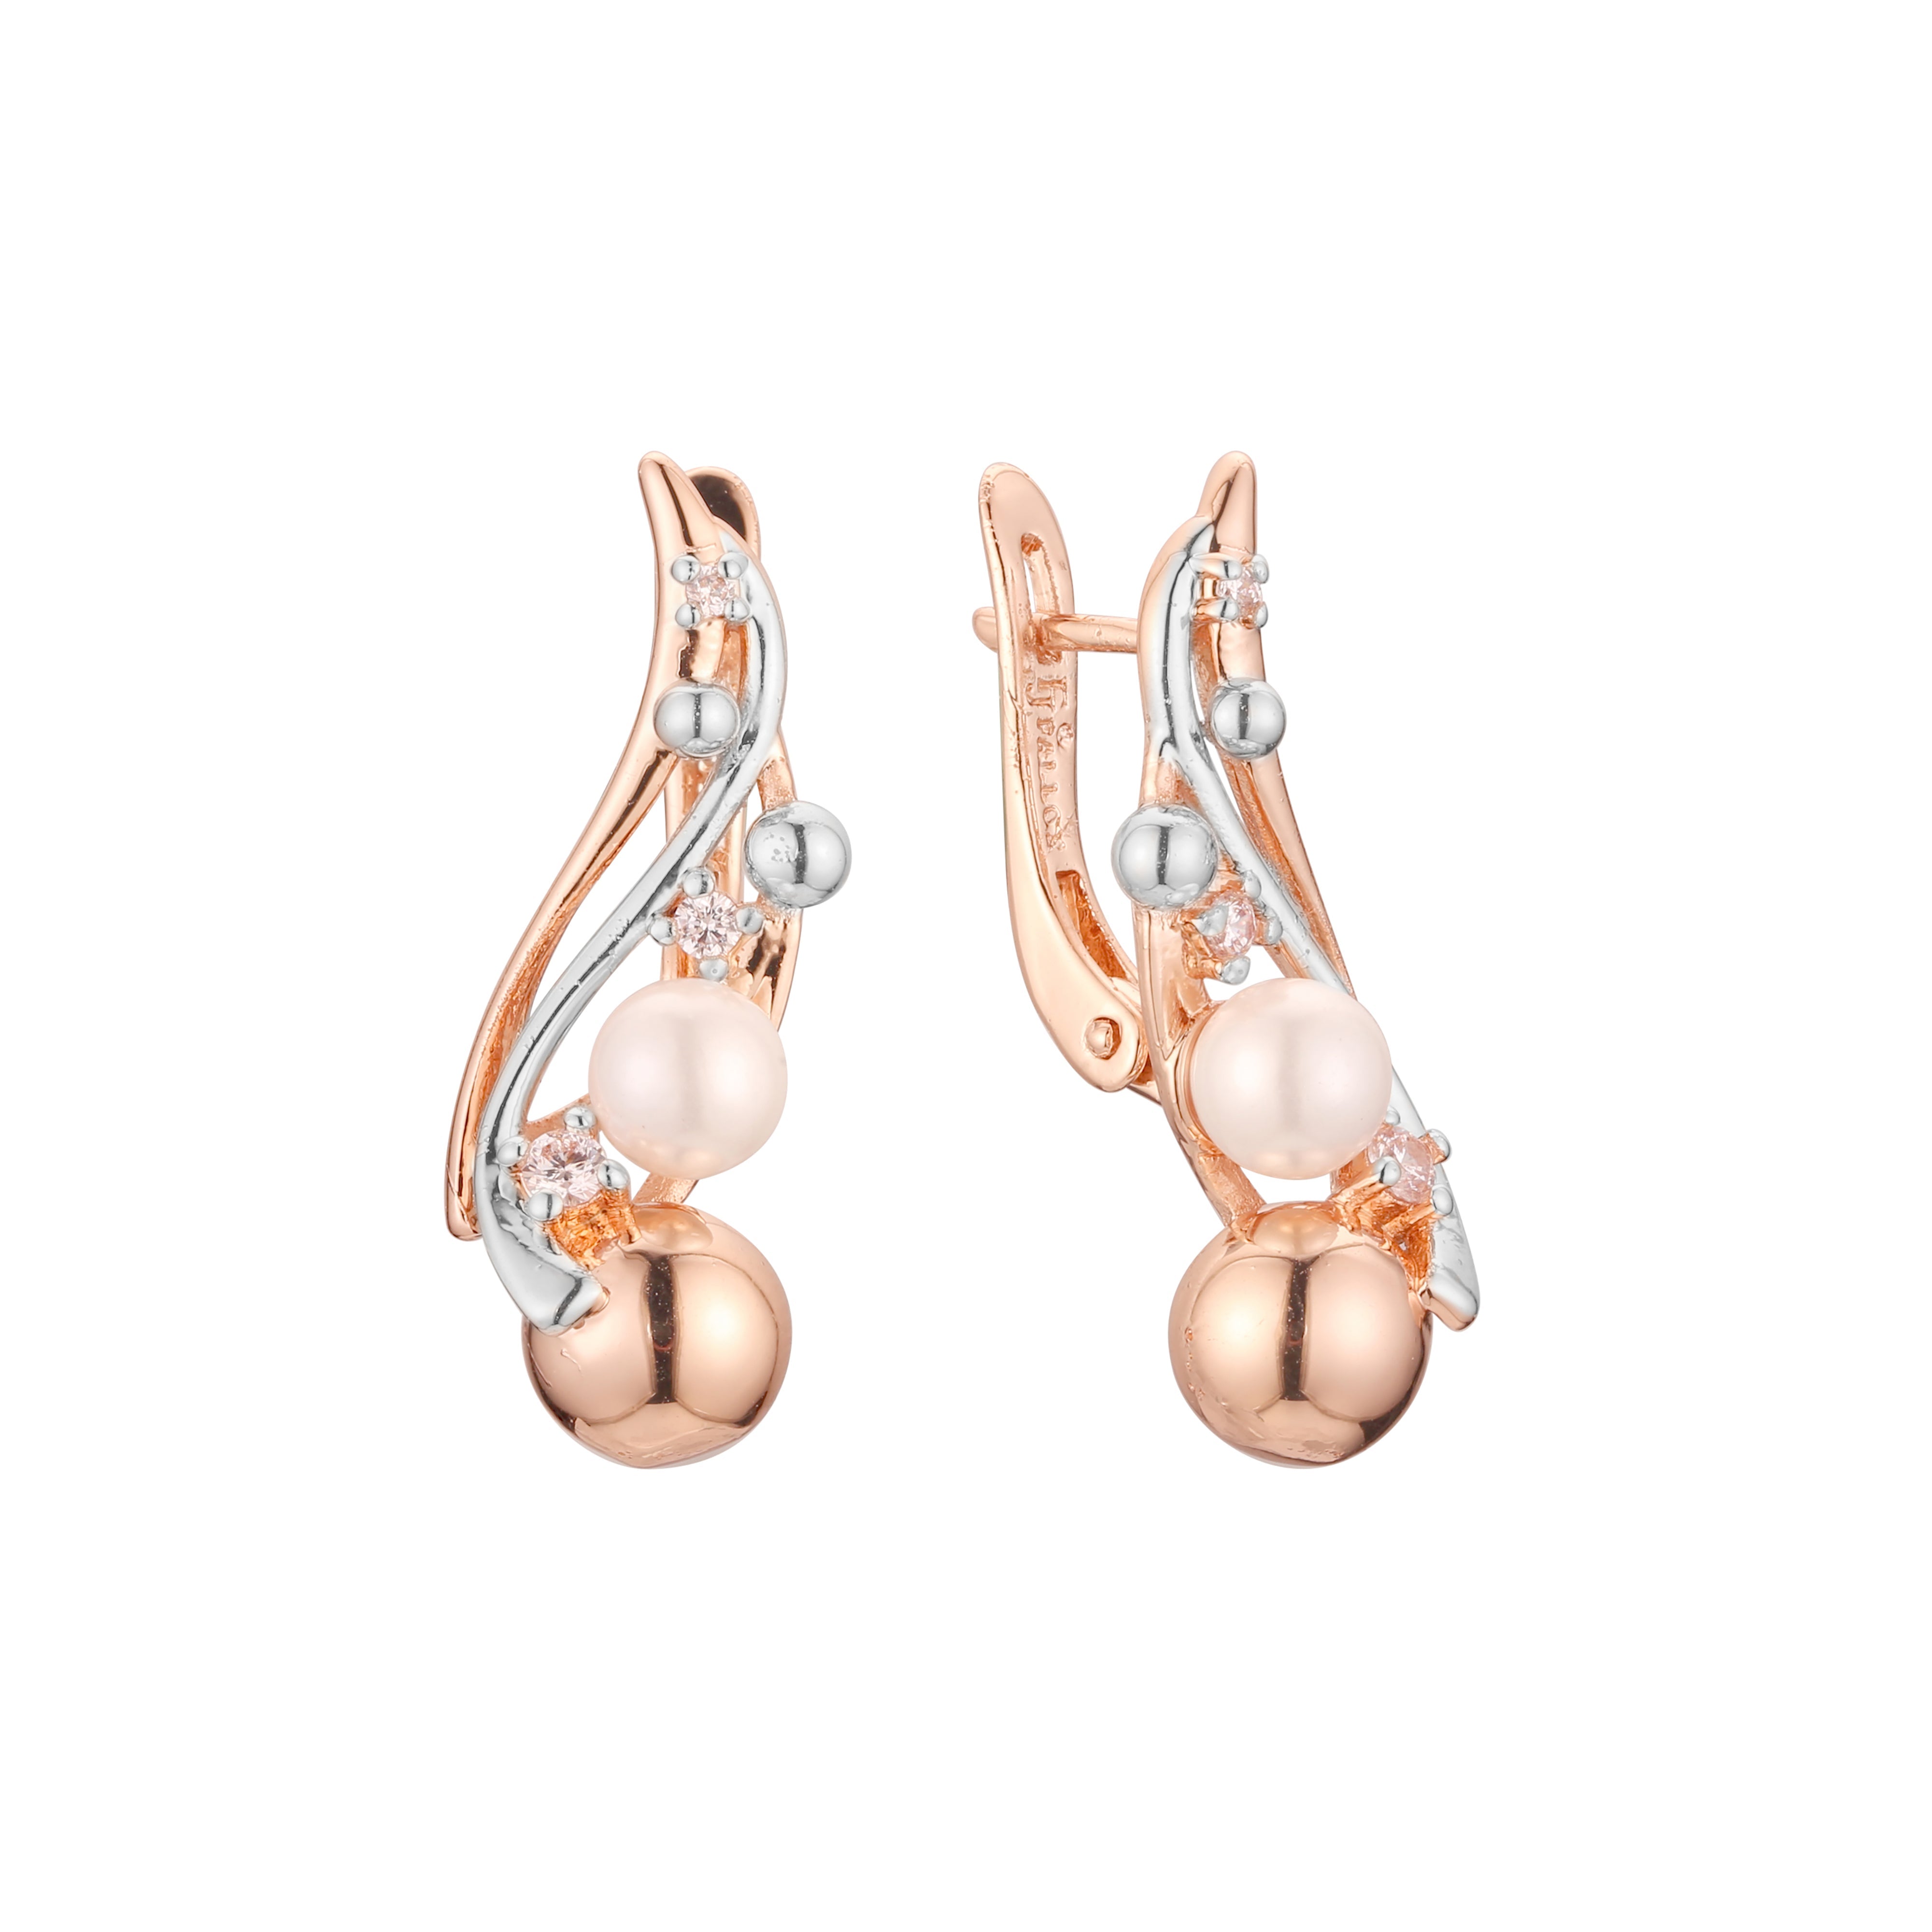 Beads and pearl 14K Gold, Rose Gold, two tone earrings